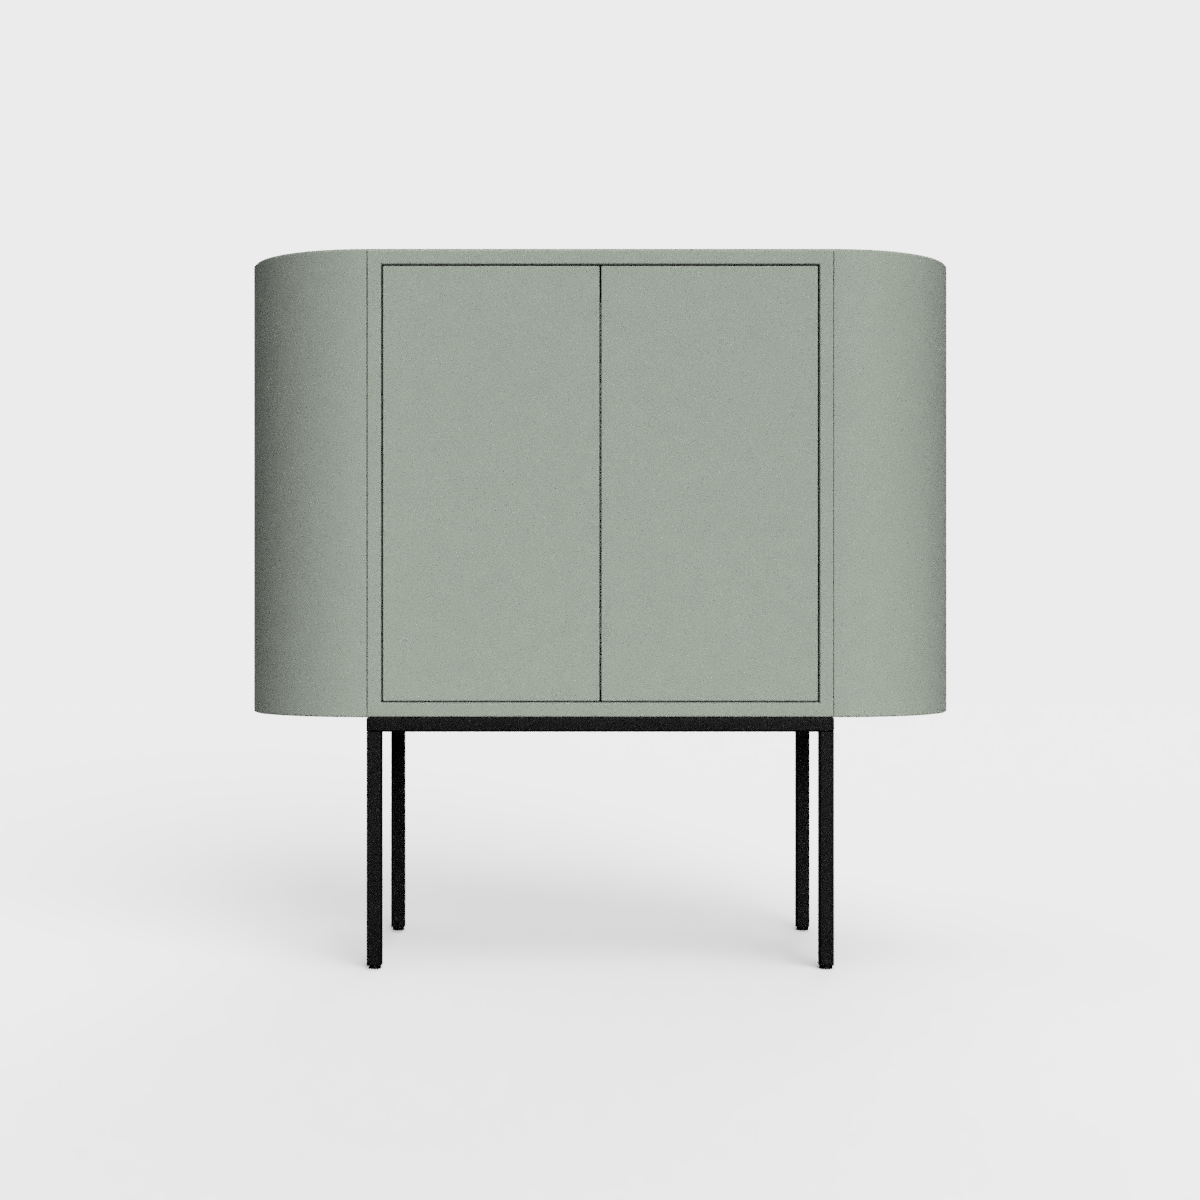 Siena 01 Sideboard in dark matcha green color, powder-coated steel, elegant and modern piece of furniture for your living room